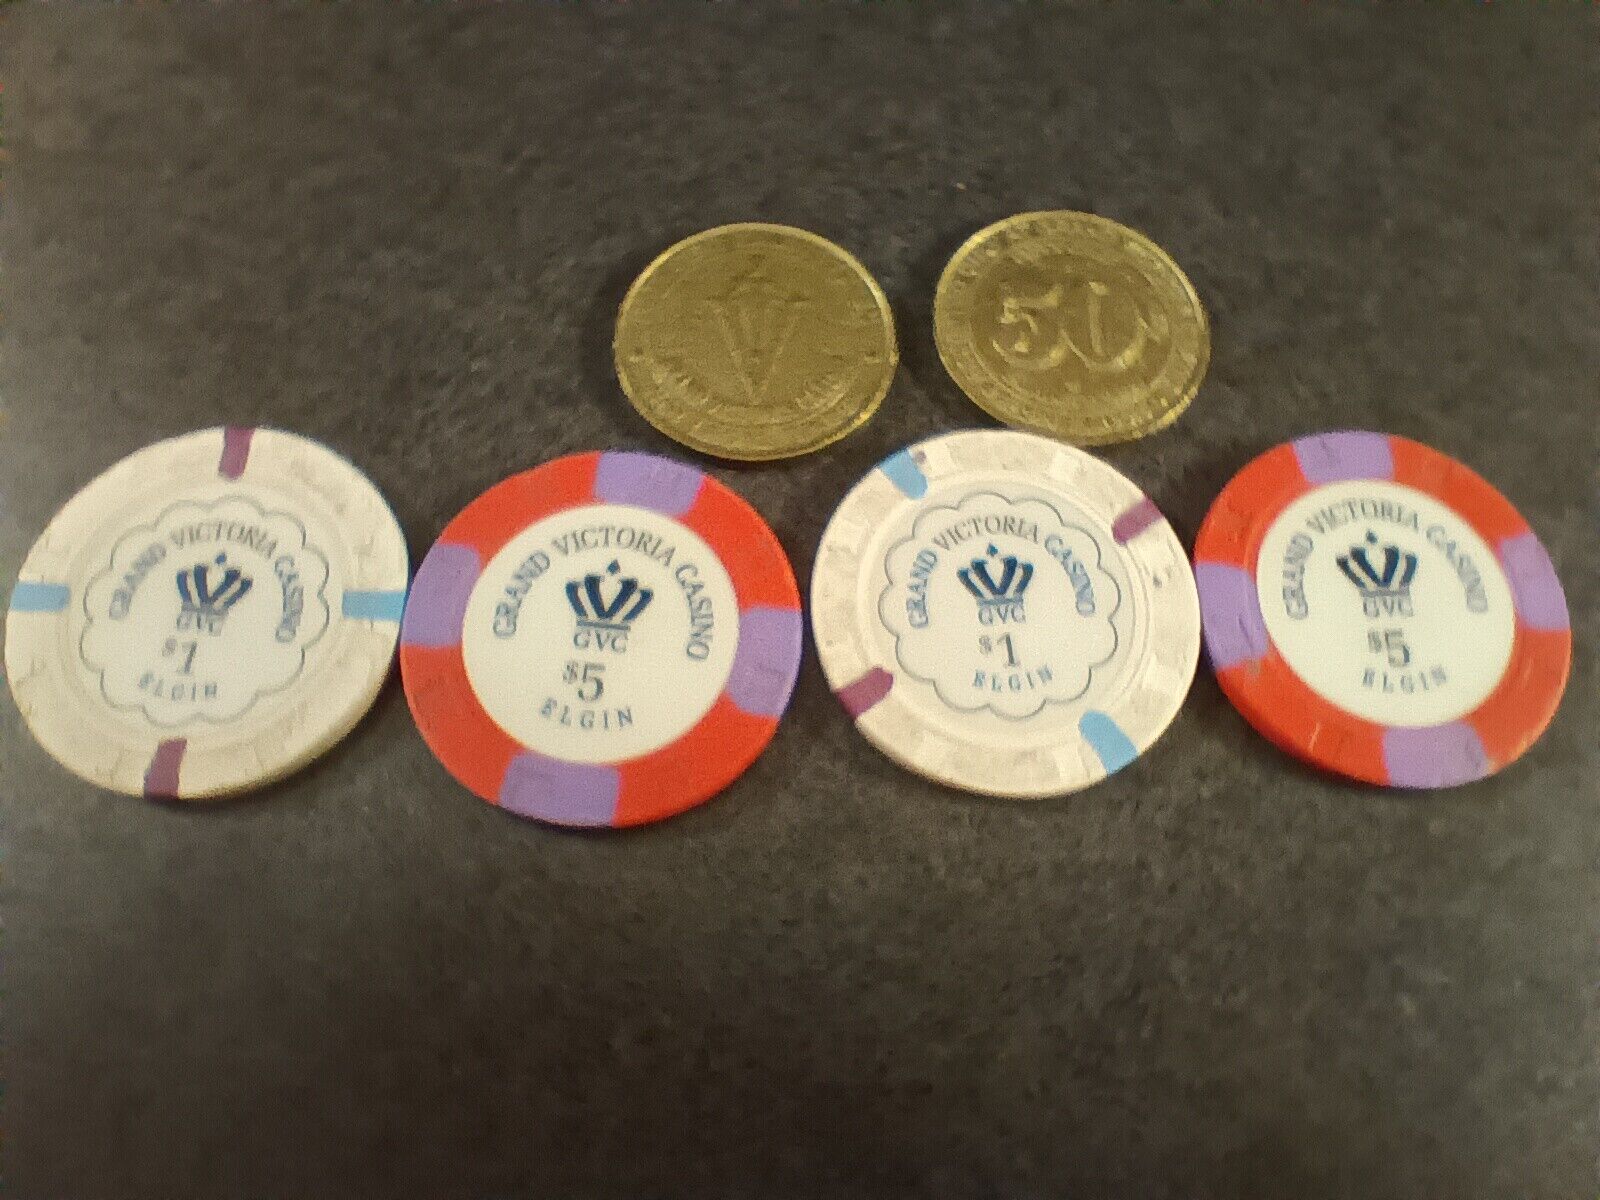 Vintage Grand Victoria Casino Elgin Illinois Chips And Coins From 1996.